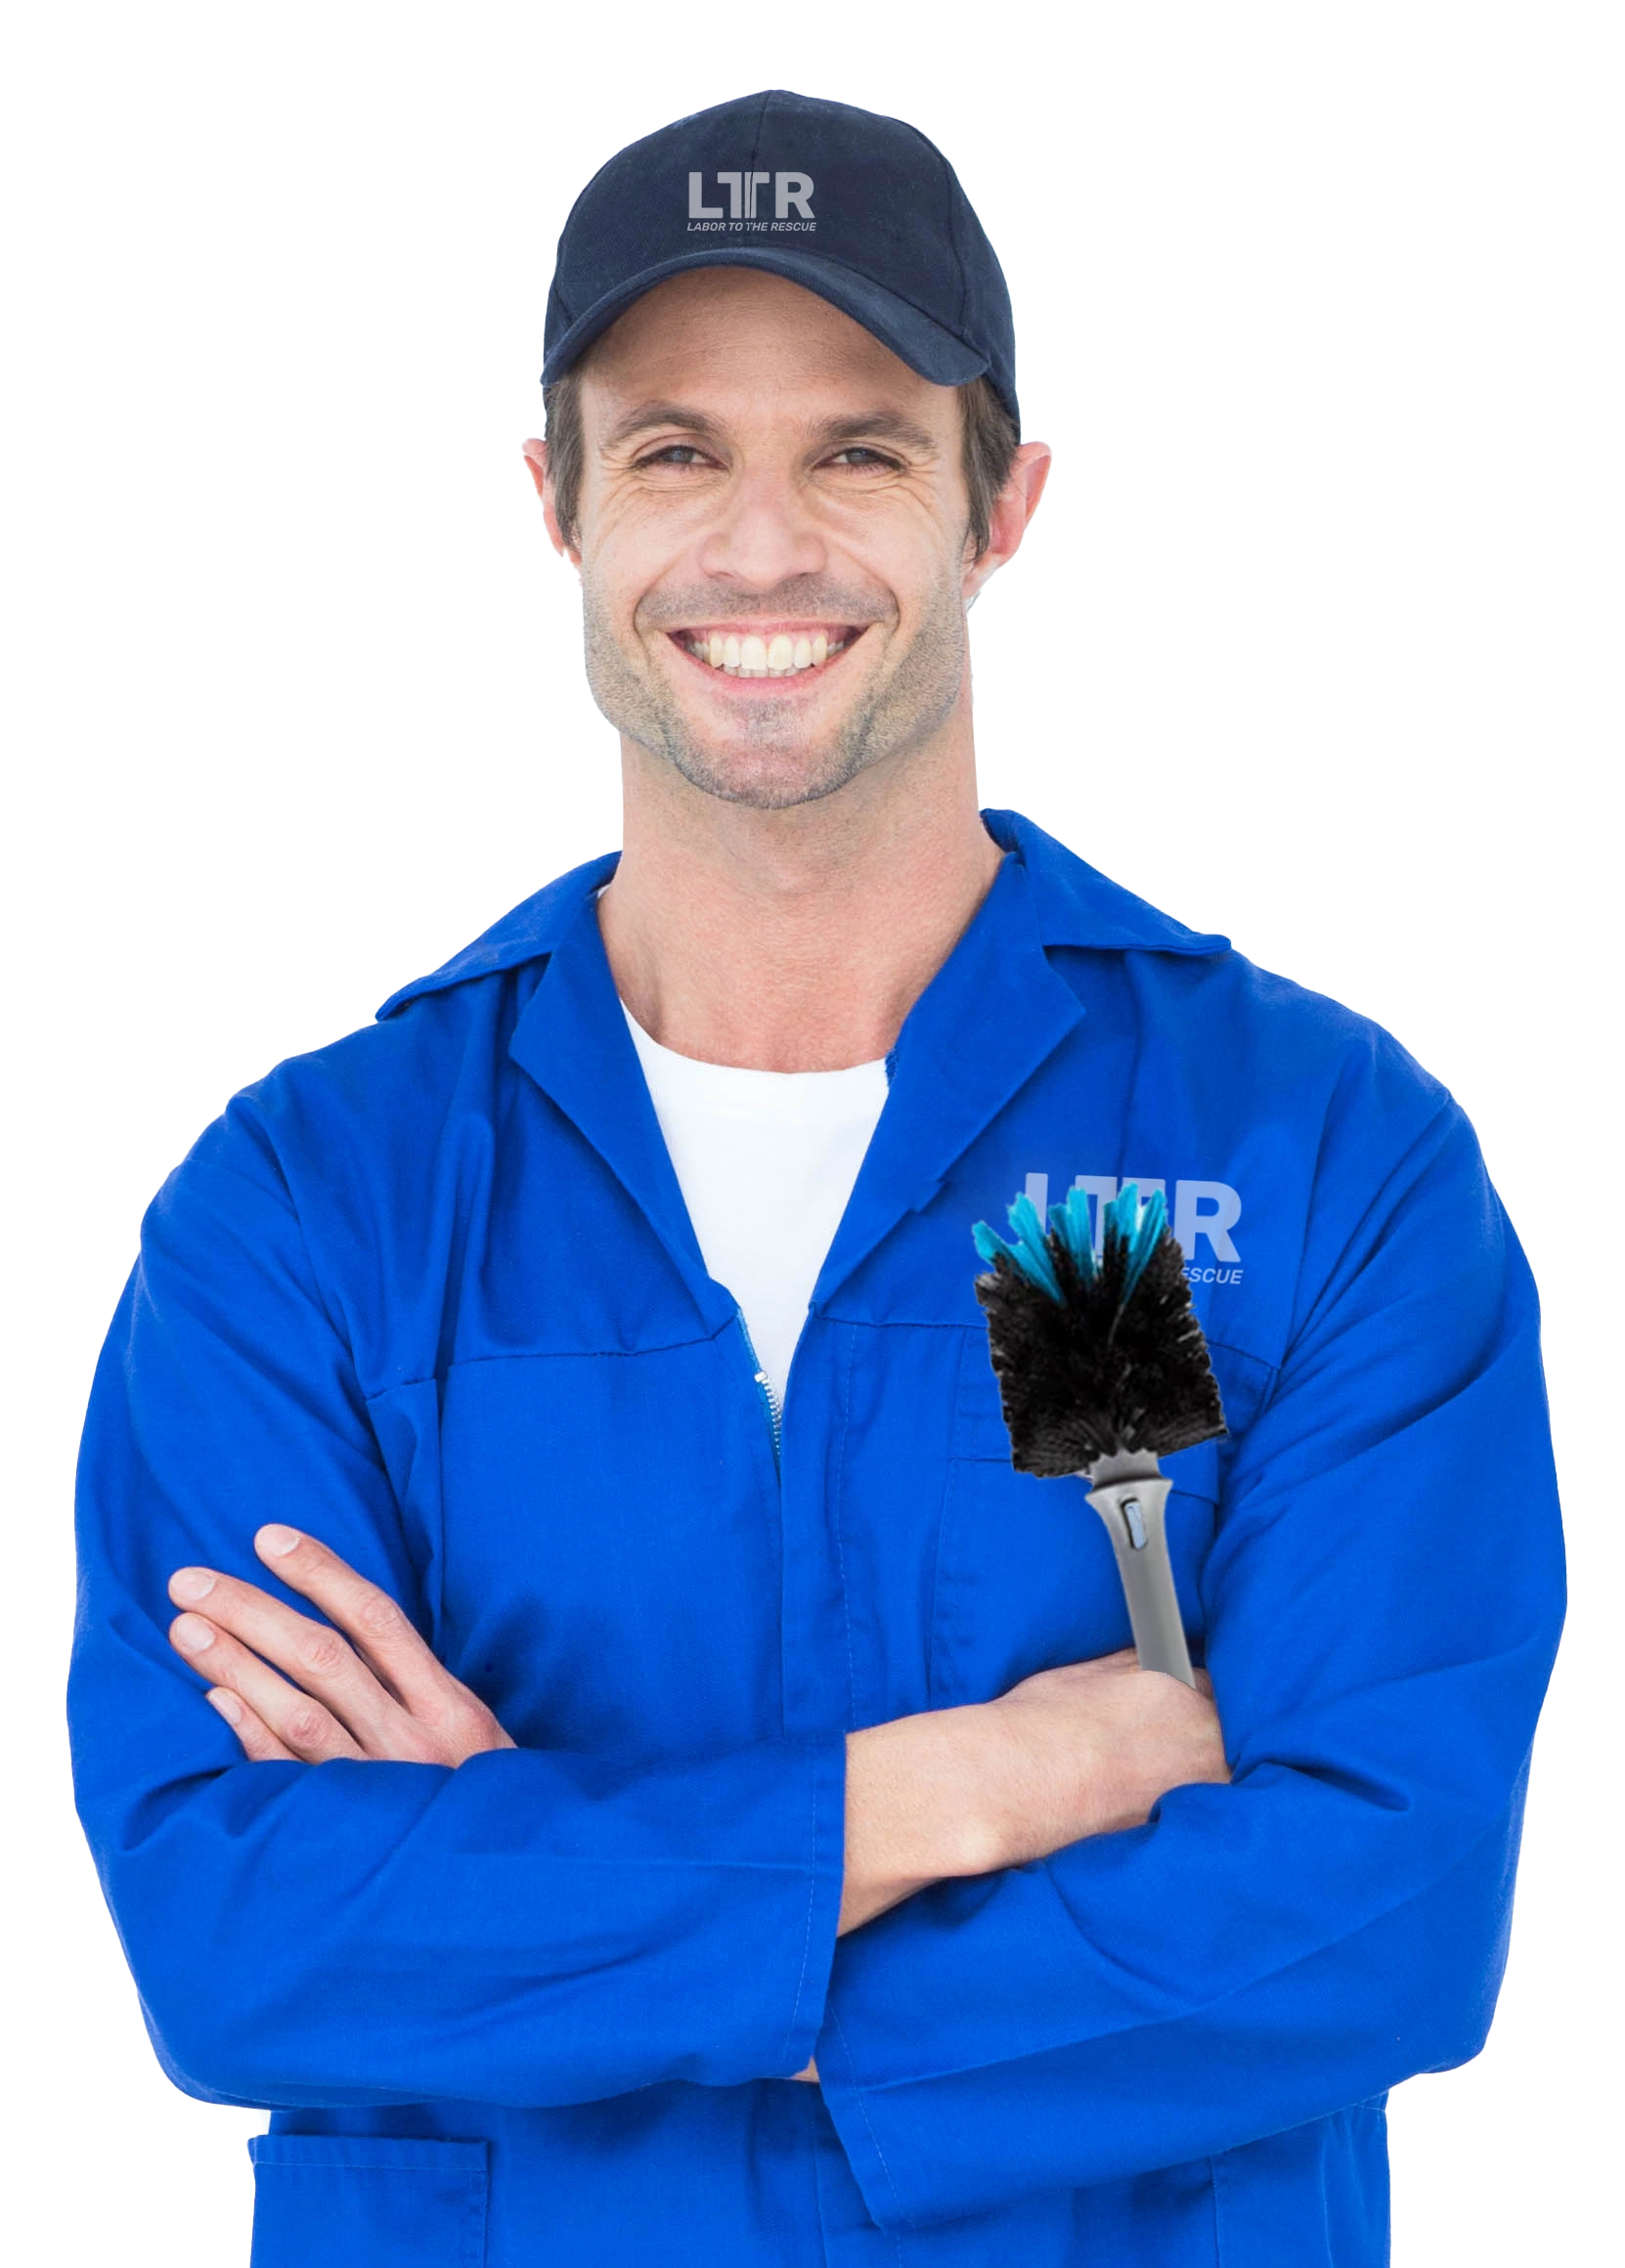 Cleaning Services in my area